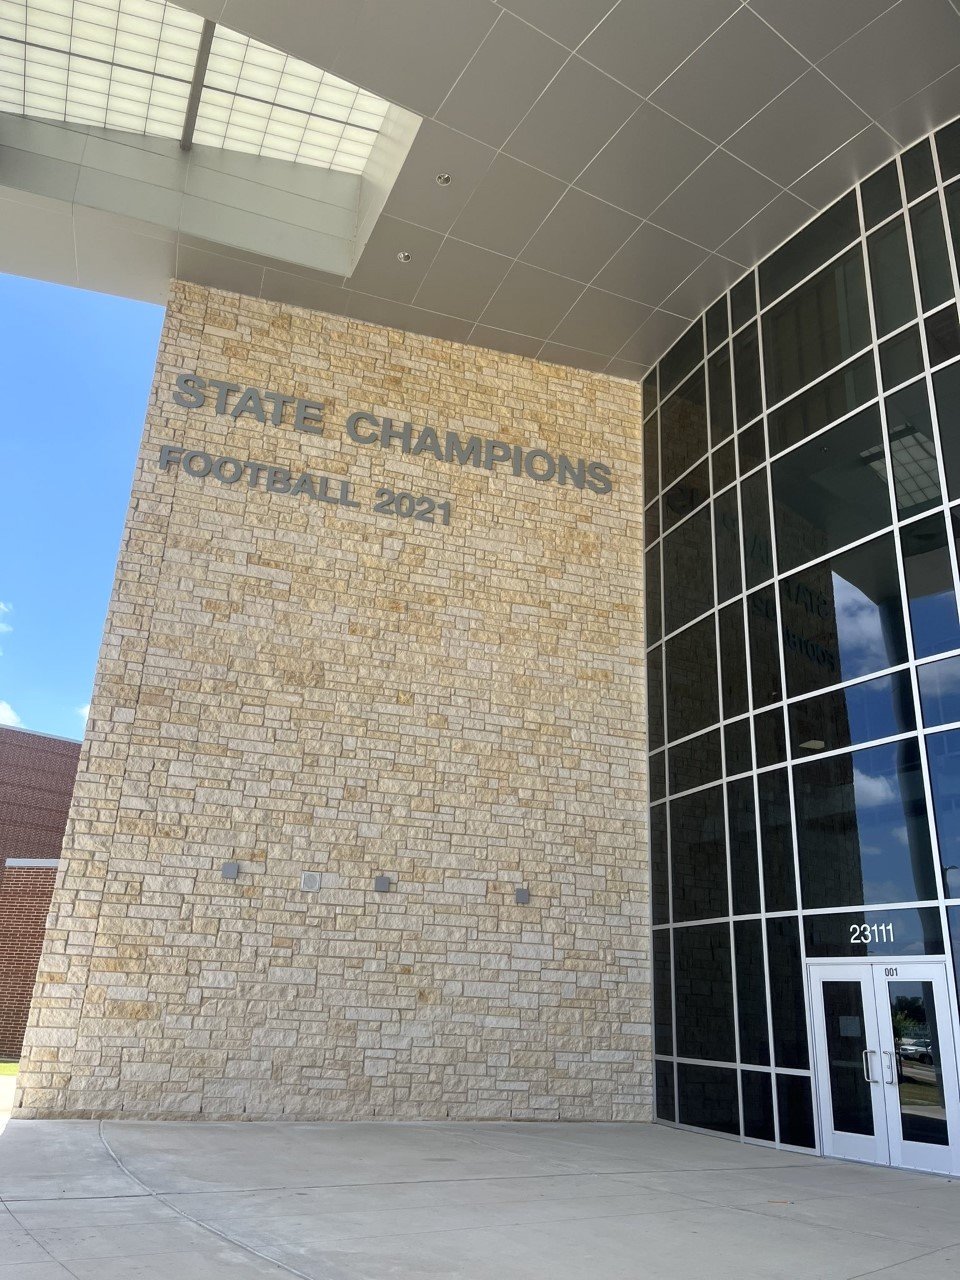 Paetow installed a sign to celebrate its 2021 state championship football team at the main entrance of the high school.